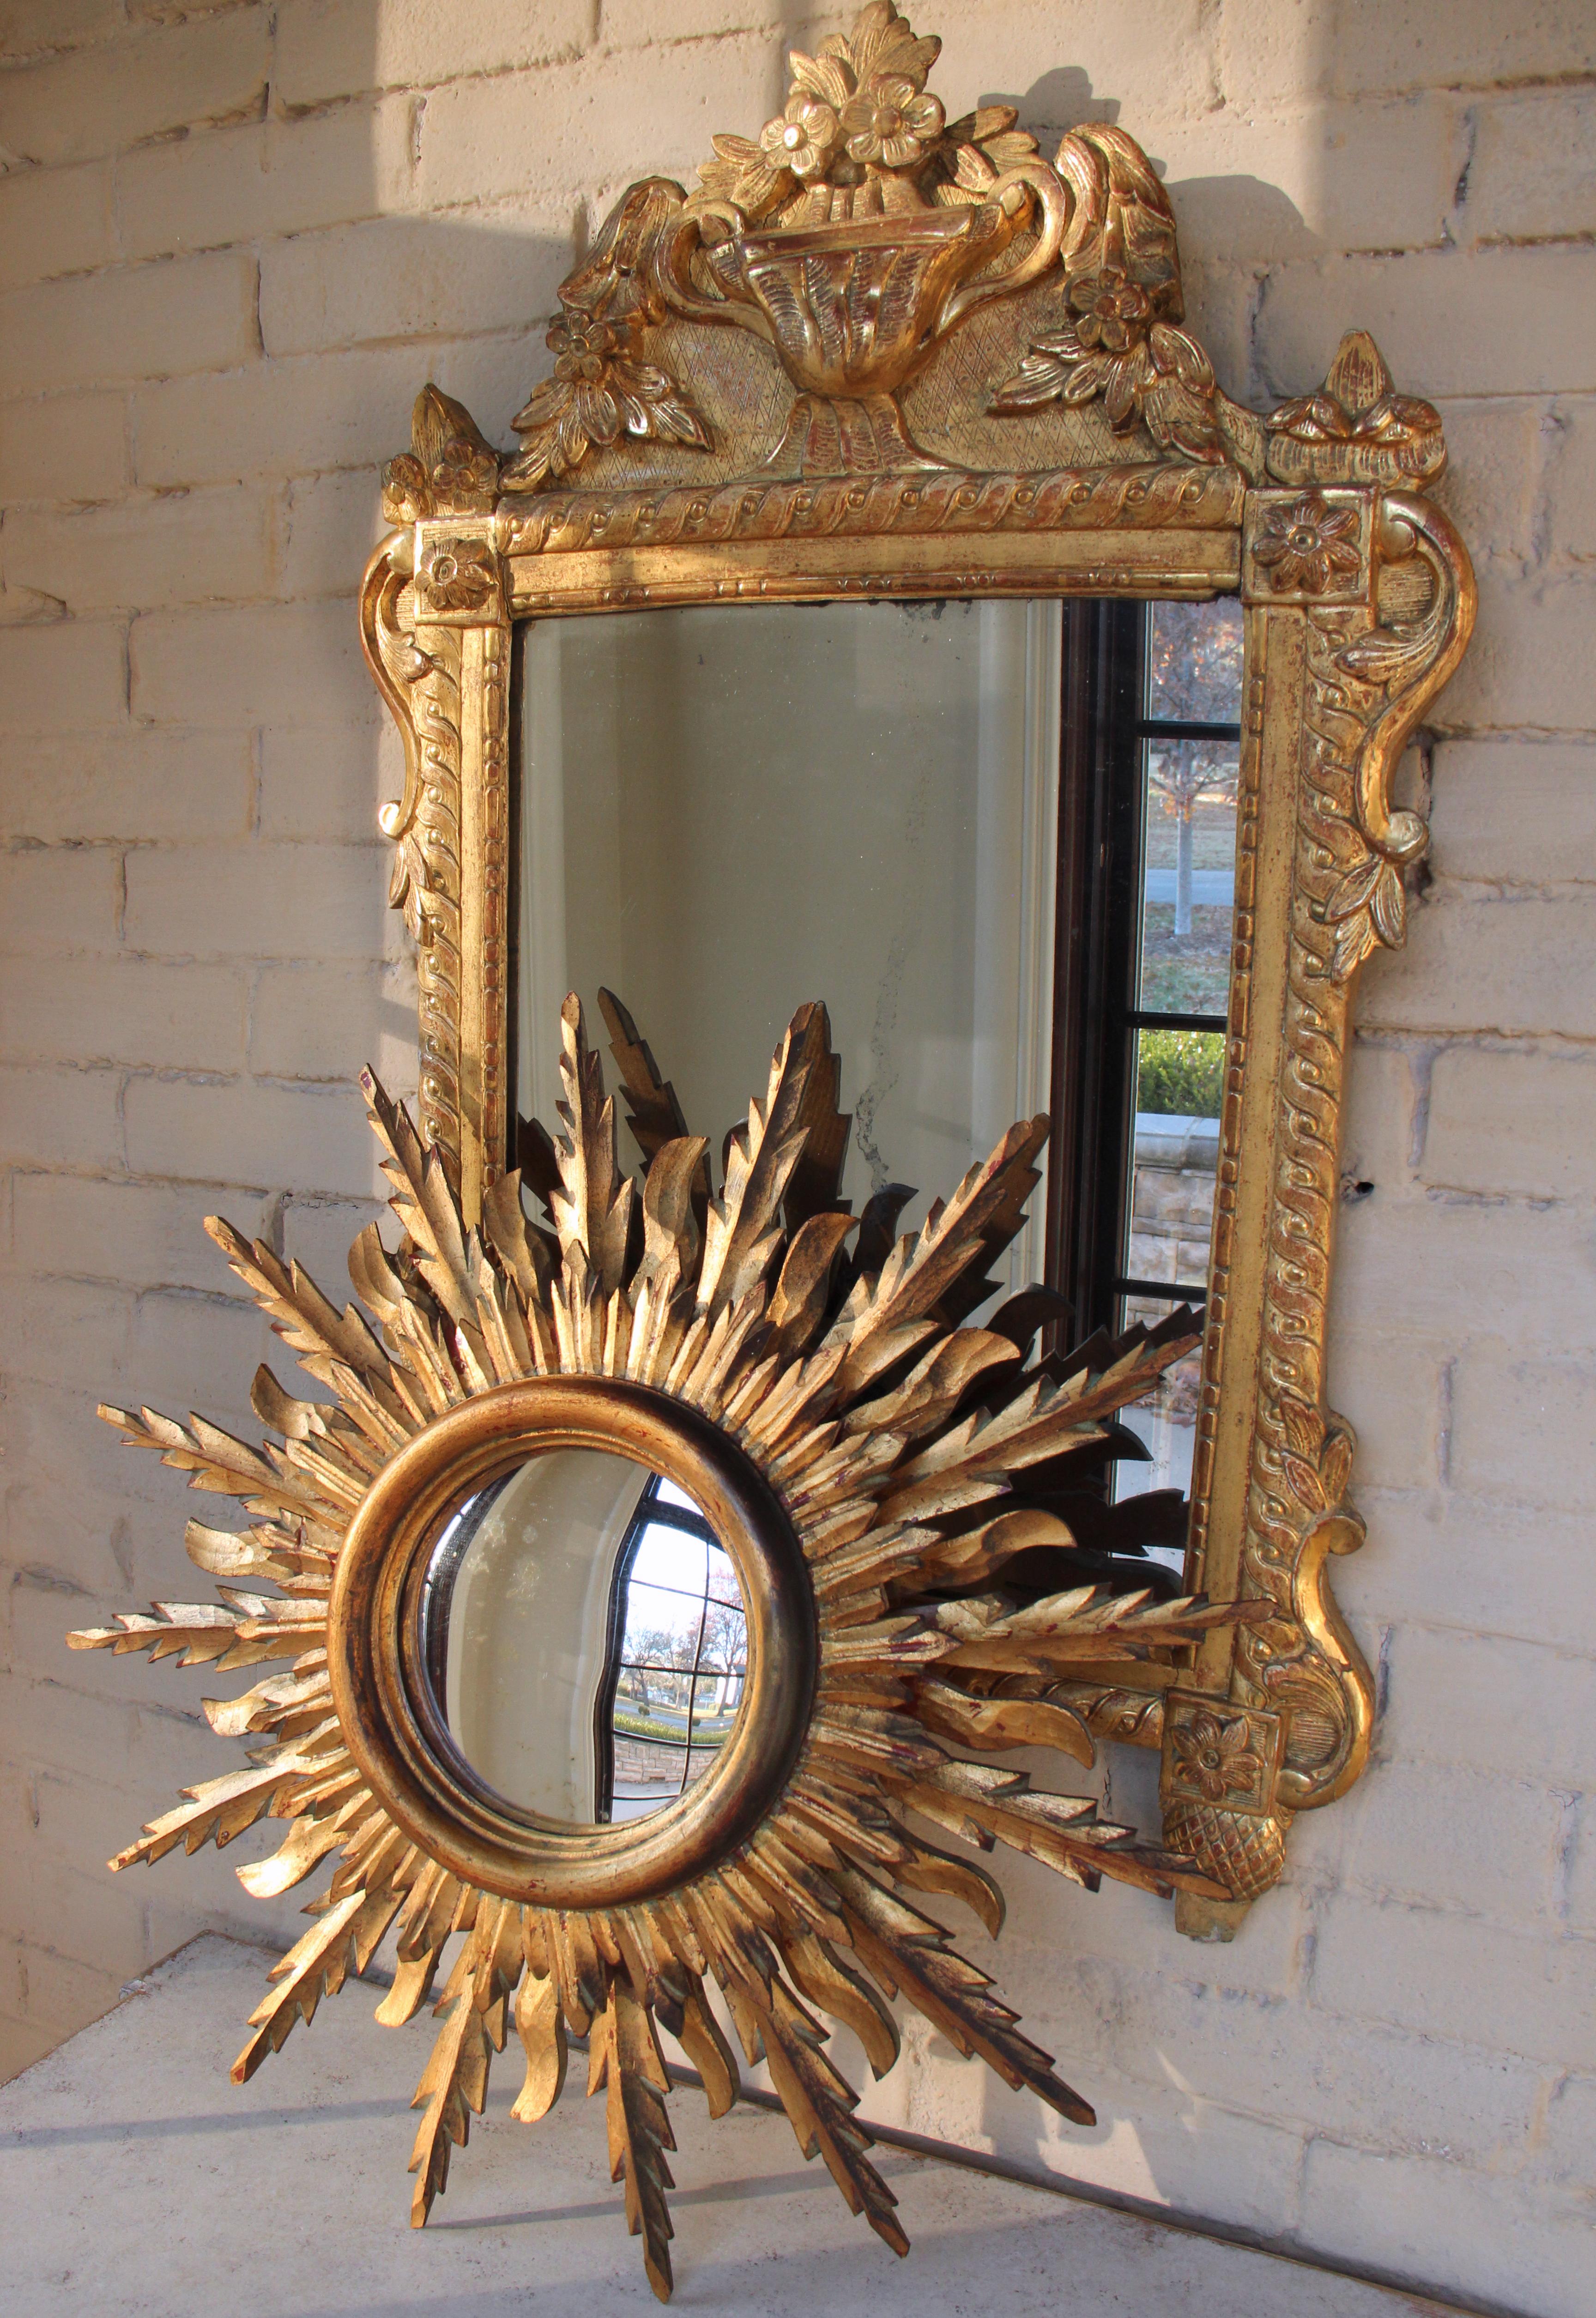 A stunning midcentury French sunburst mirror, circa 1930 with rays arranged in a double layer pattern. Original mirror plate. The mirror is 6.88 inches in diameter.